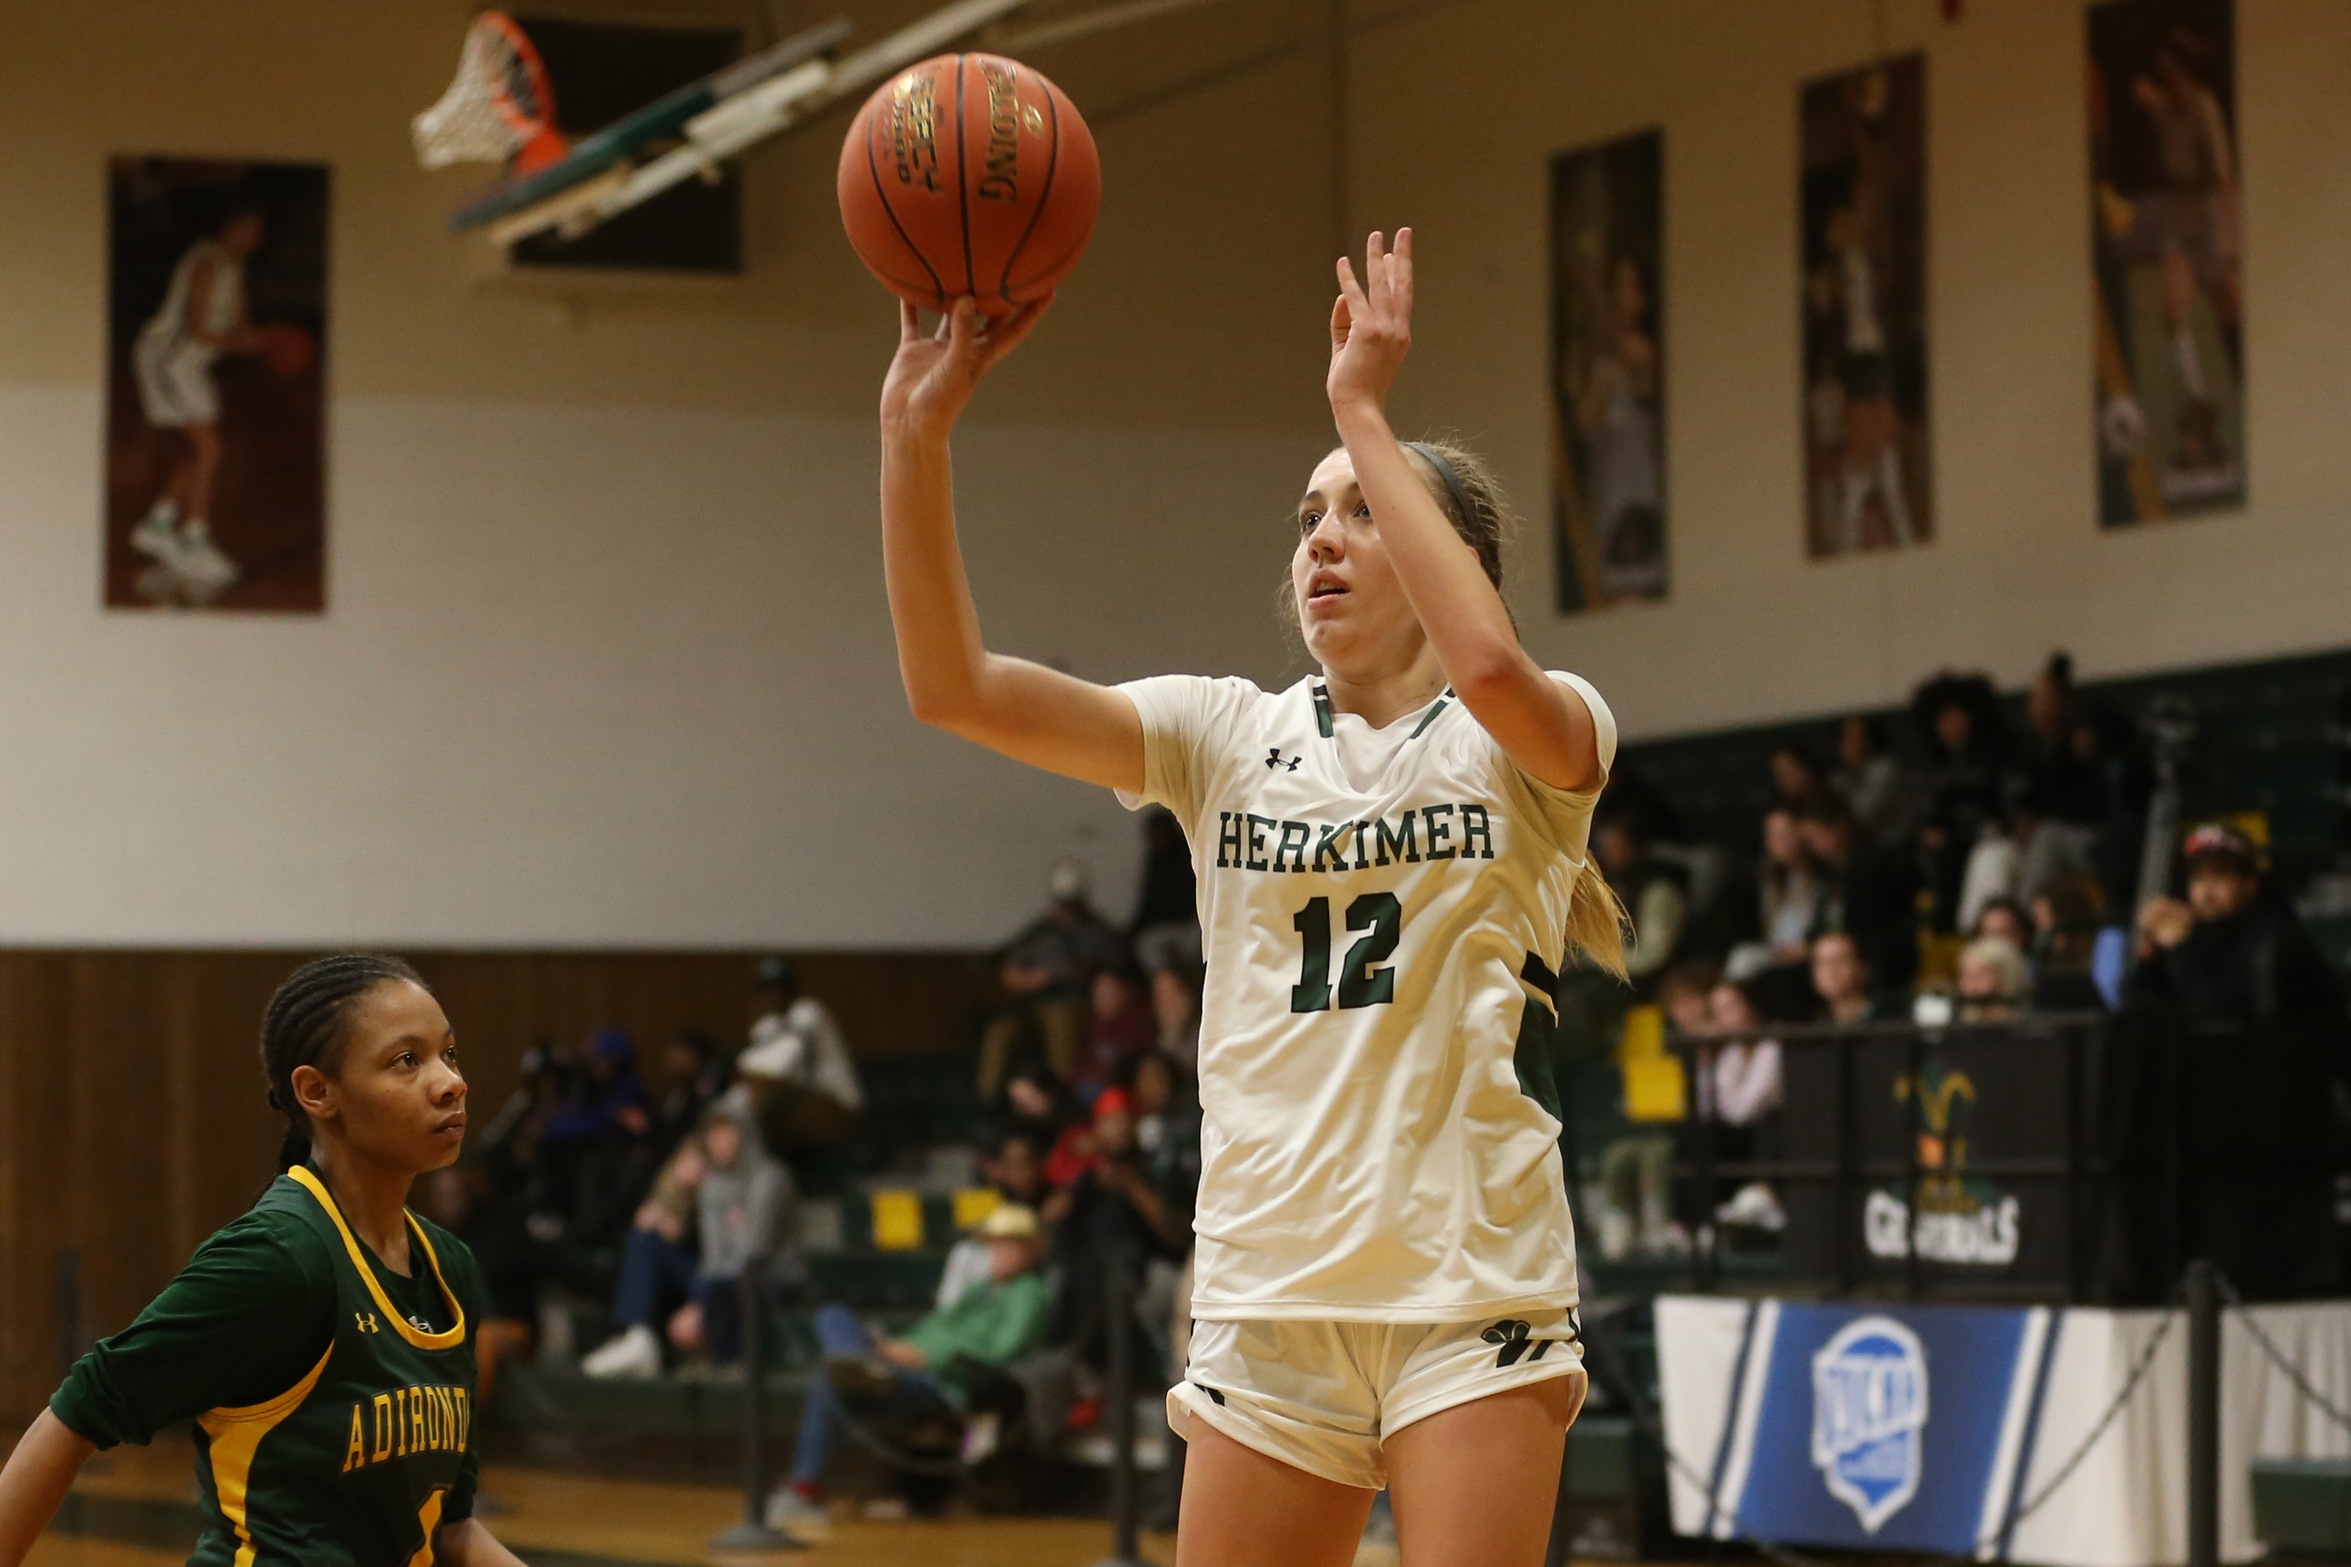 Reimer's Career-High 28 Points Helps Upset No. 15 Ranked Raiders